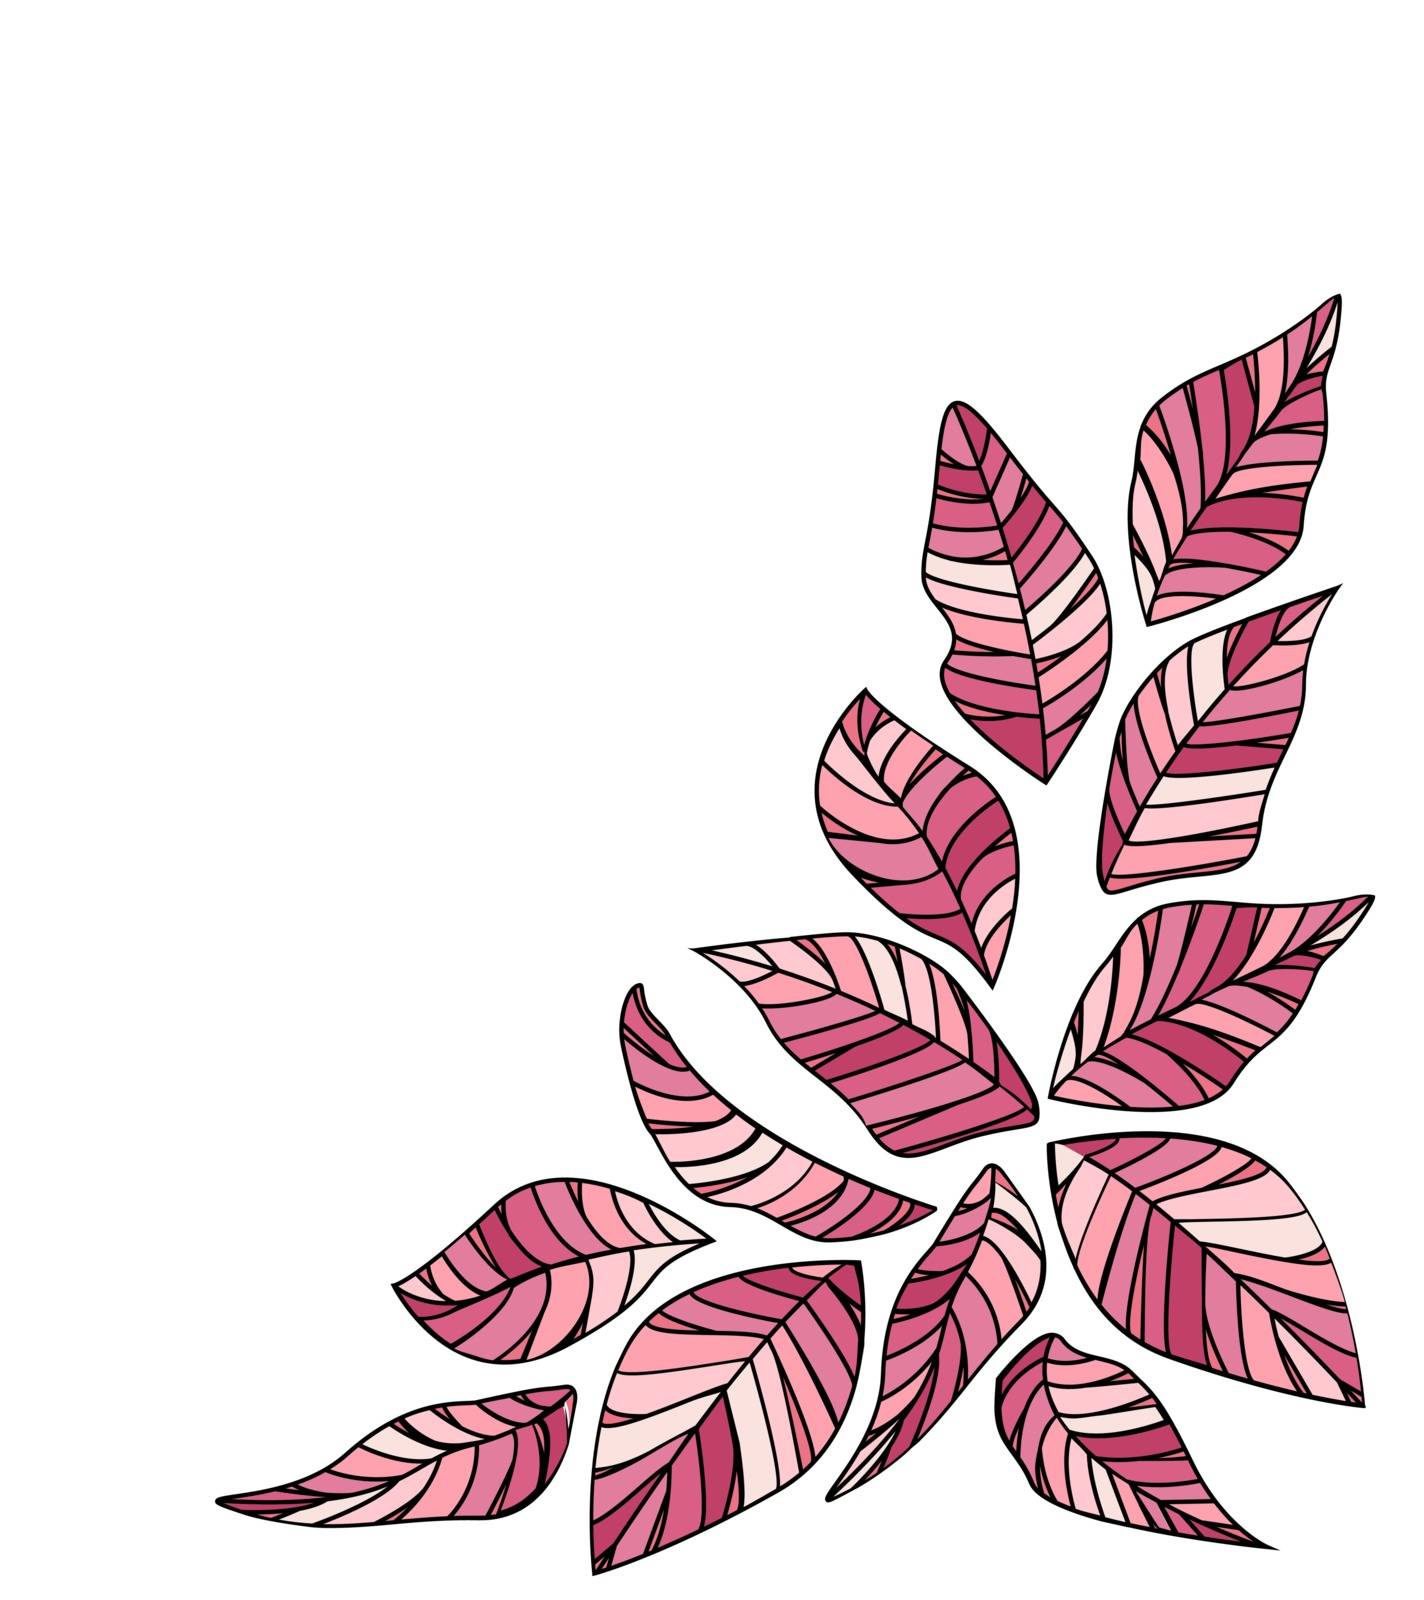 Vector illustration Natural background with colorful leaves. Decoration of leaves